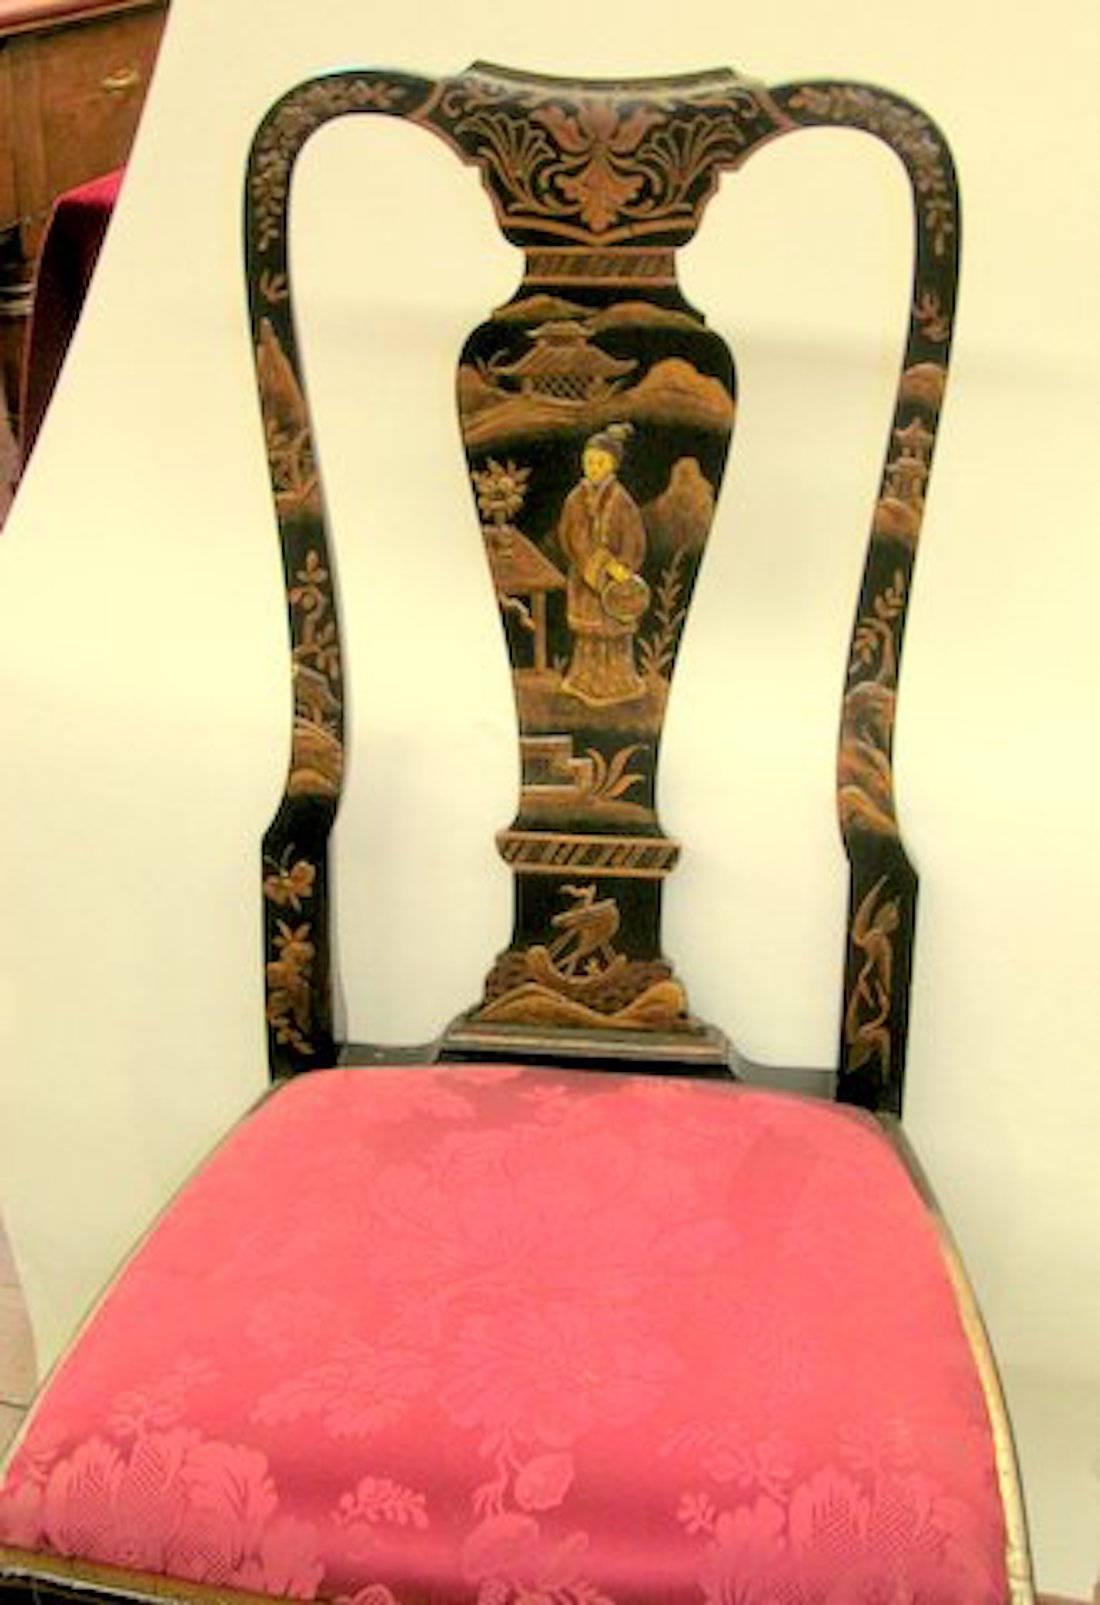 Superb Antique English chinoiserie lacquer beech Queen Anne style side chair.

Please note the extraordinary 